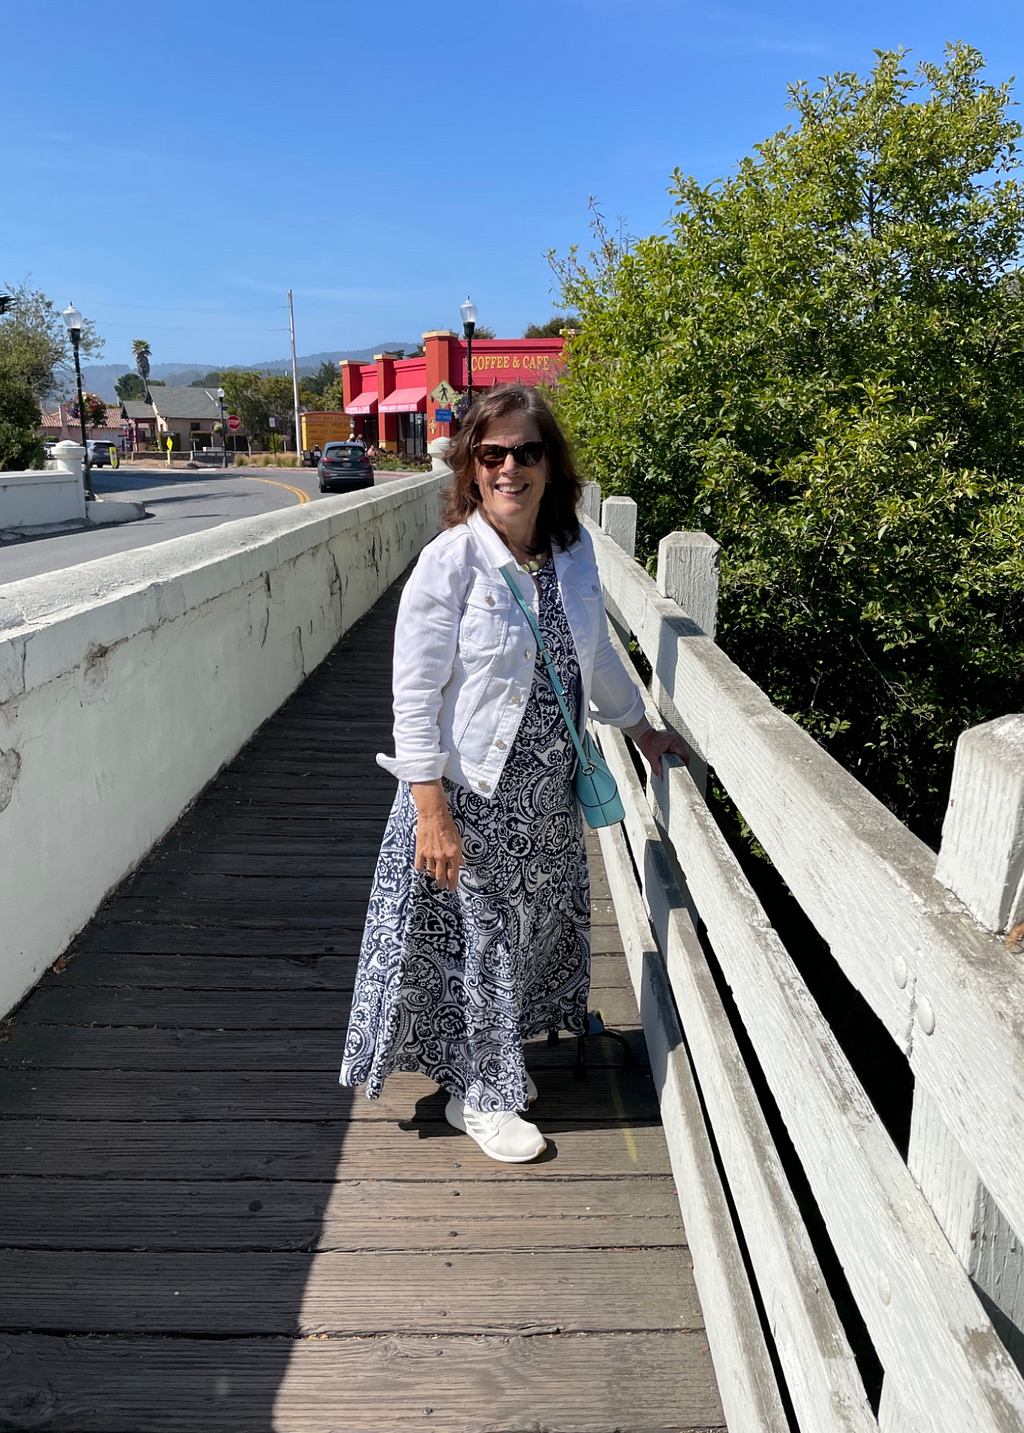 Jan is out for a walk, and stands on bridge on a gorgeous, sunny day in Half Moon Bay, California.